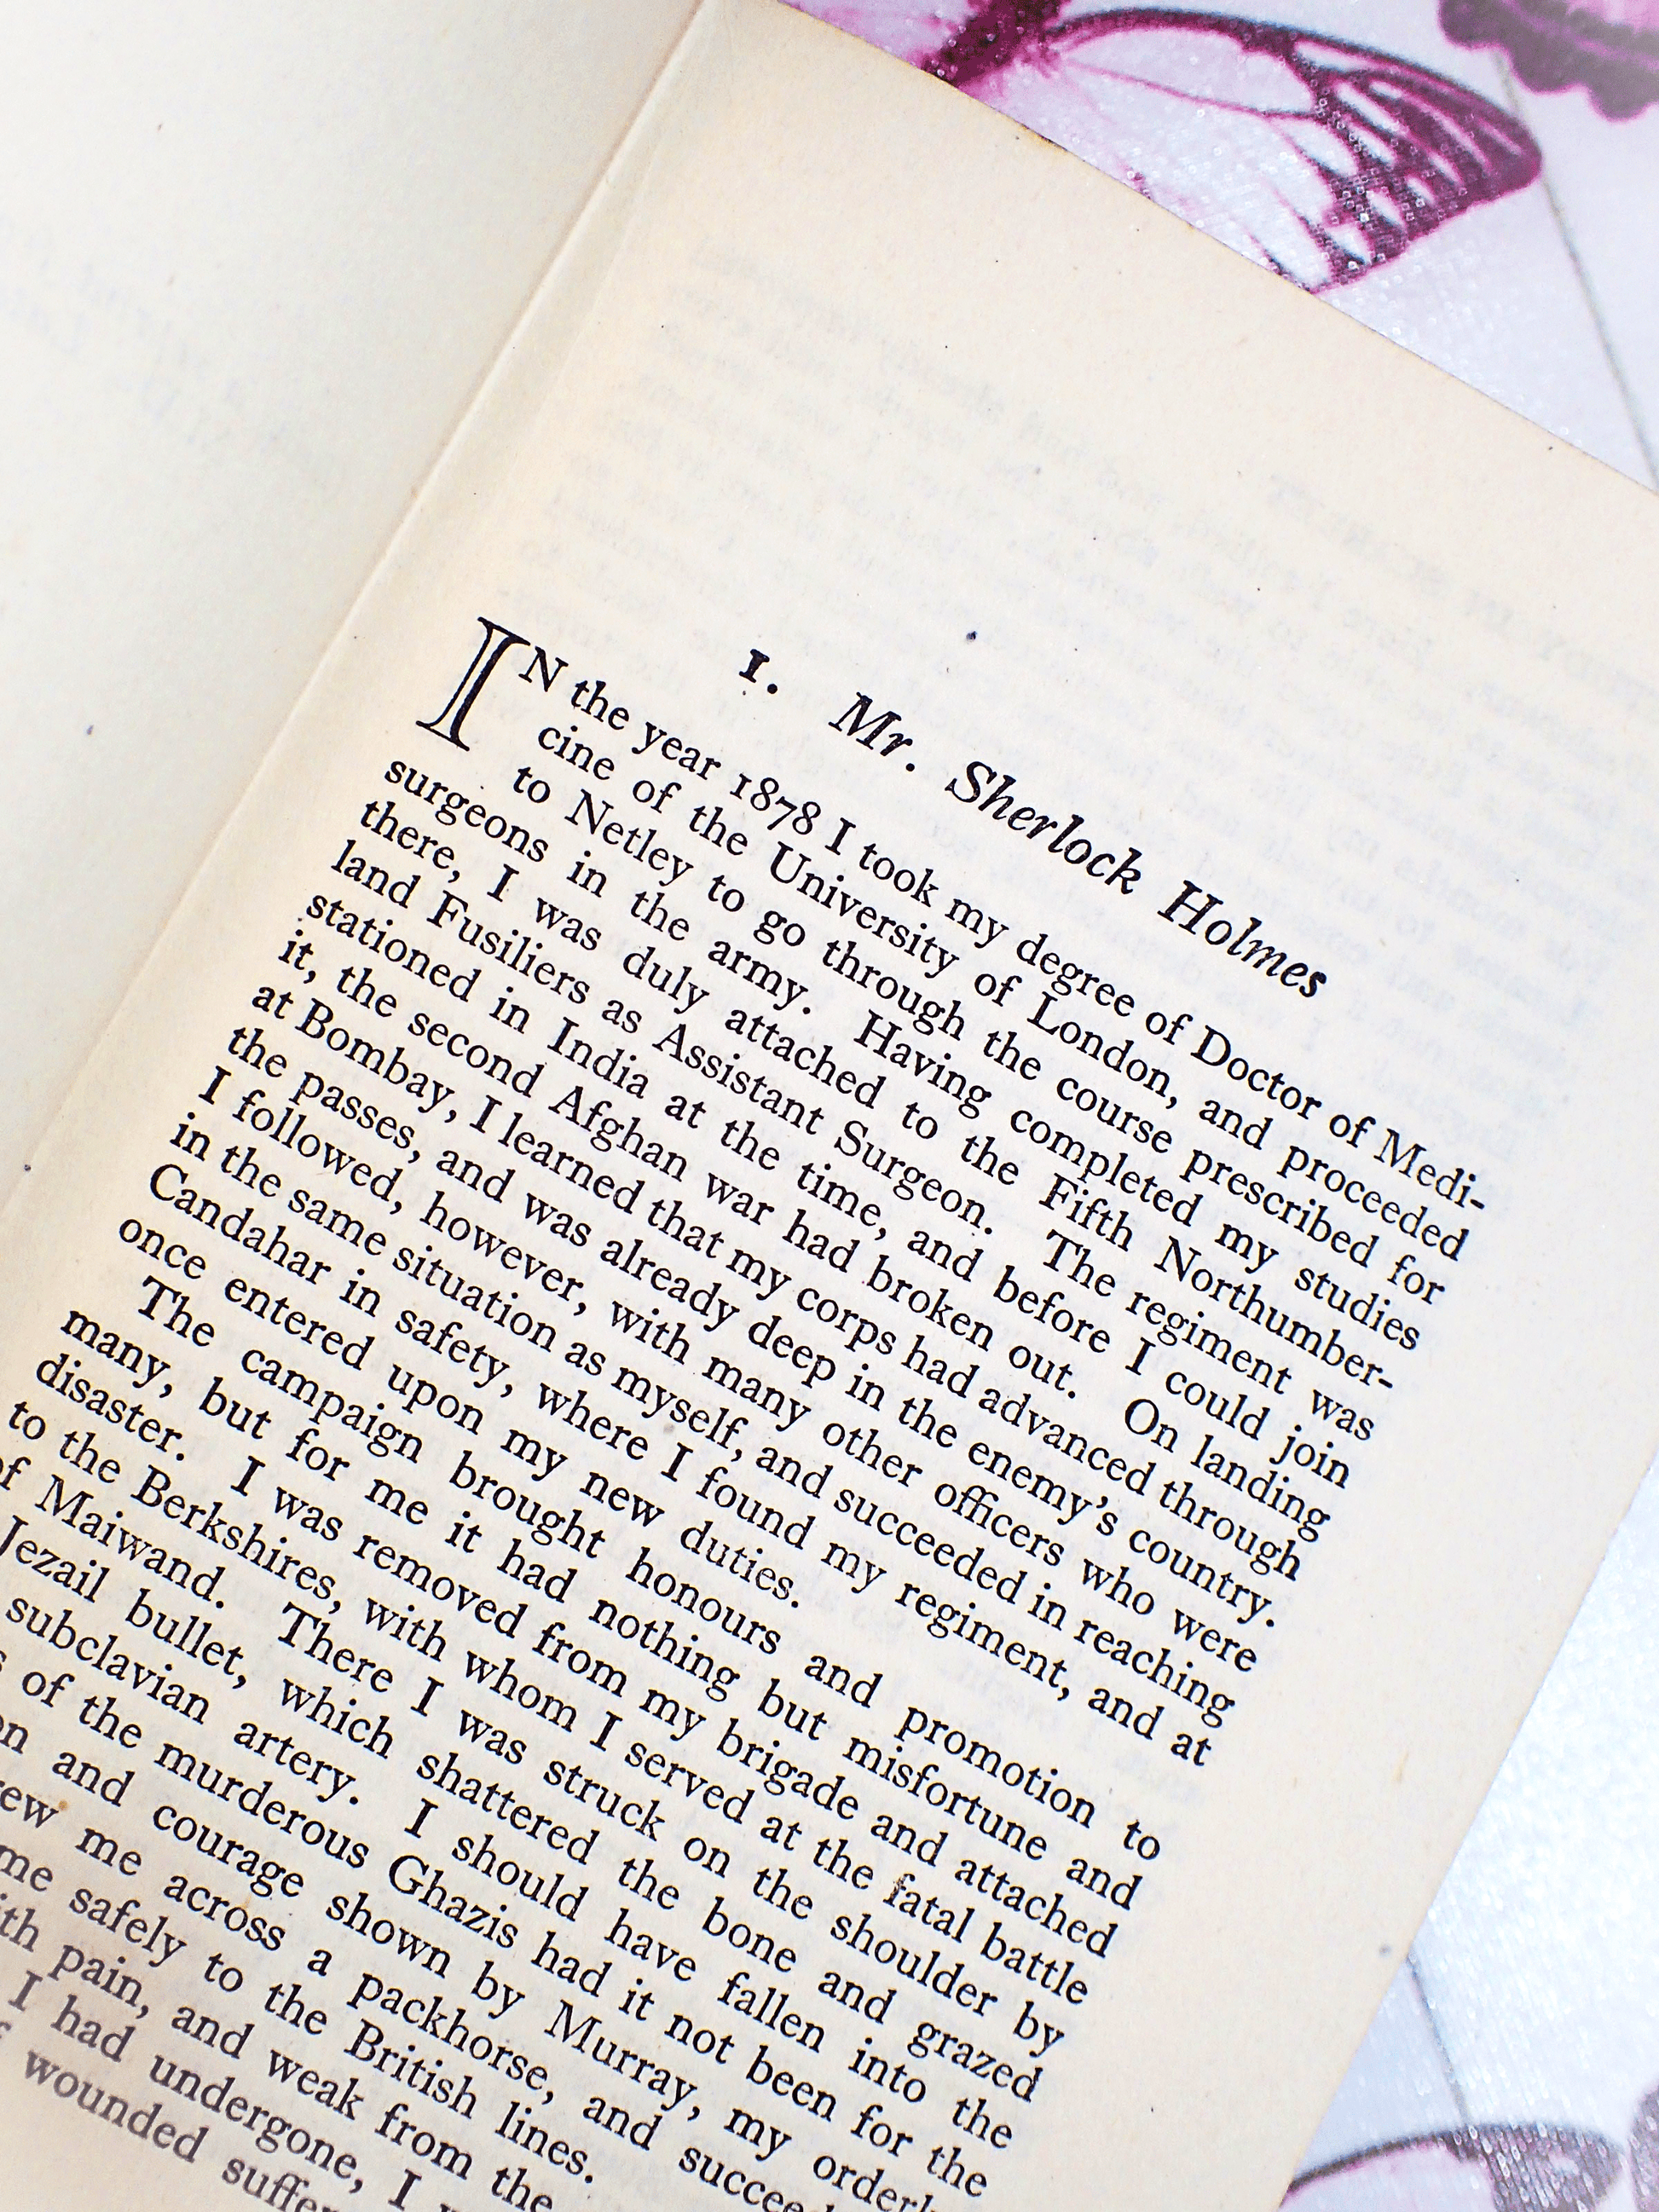 First page of Sherlock Holmes Long Stories Arthur Conan Doyle Hound of Baskervilles Scarce Jacket showing text: "1. Mr Sherlock Holmes..."